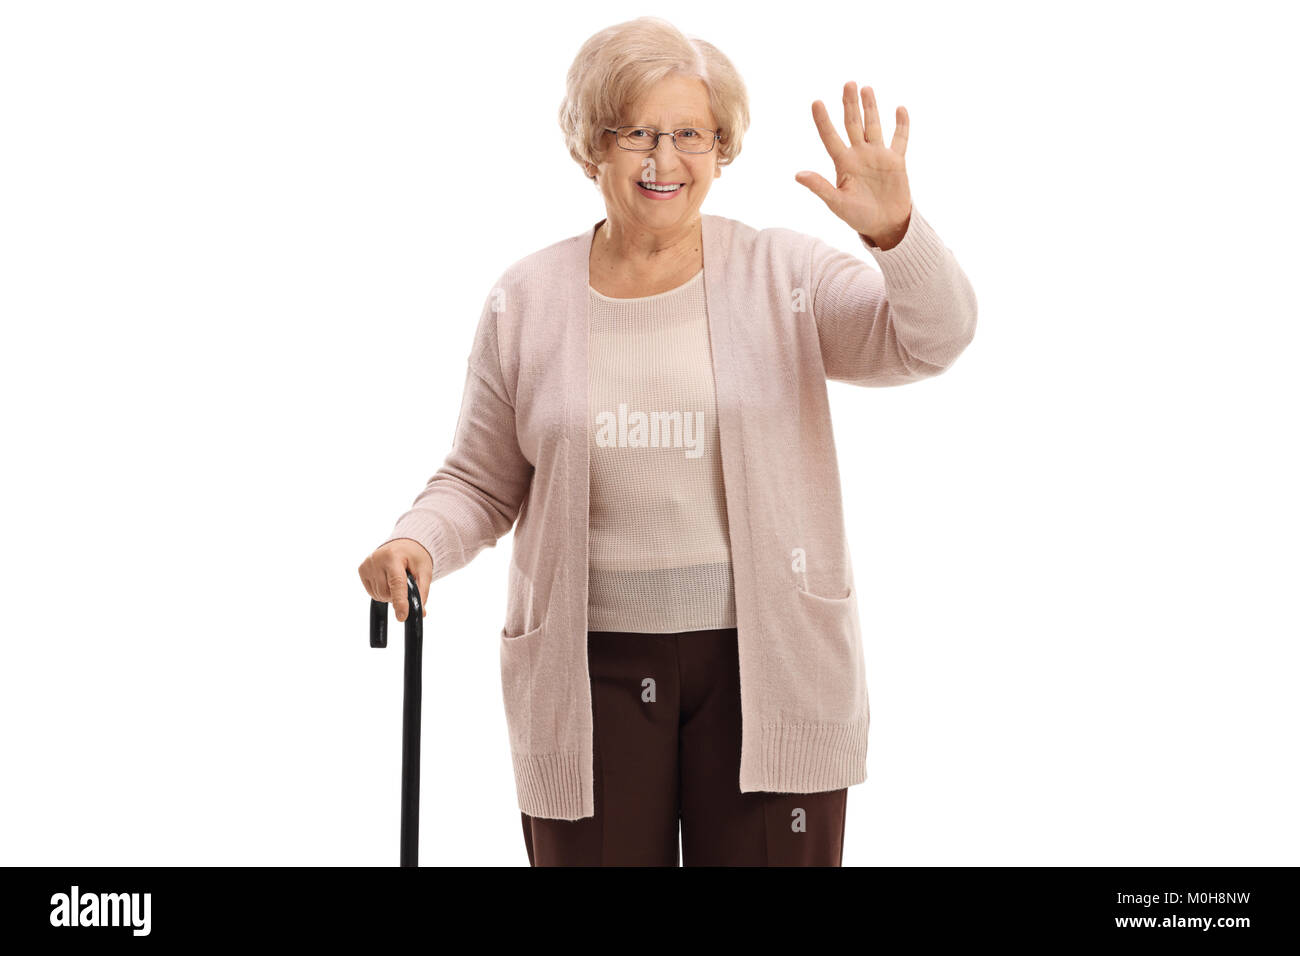 Elderly woman with a cane waving at the camera isolated on white background Stock Photo